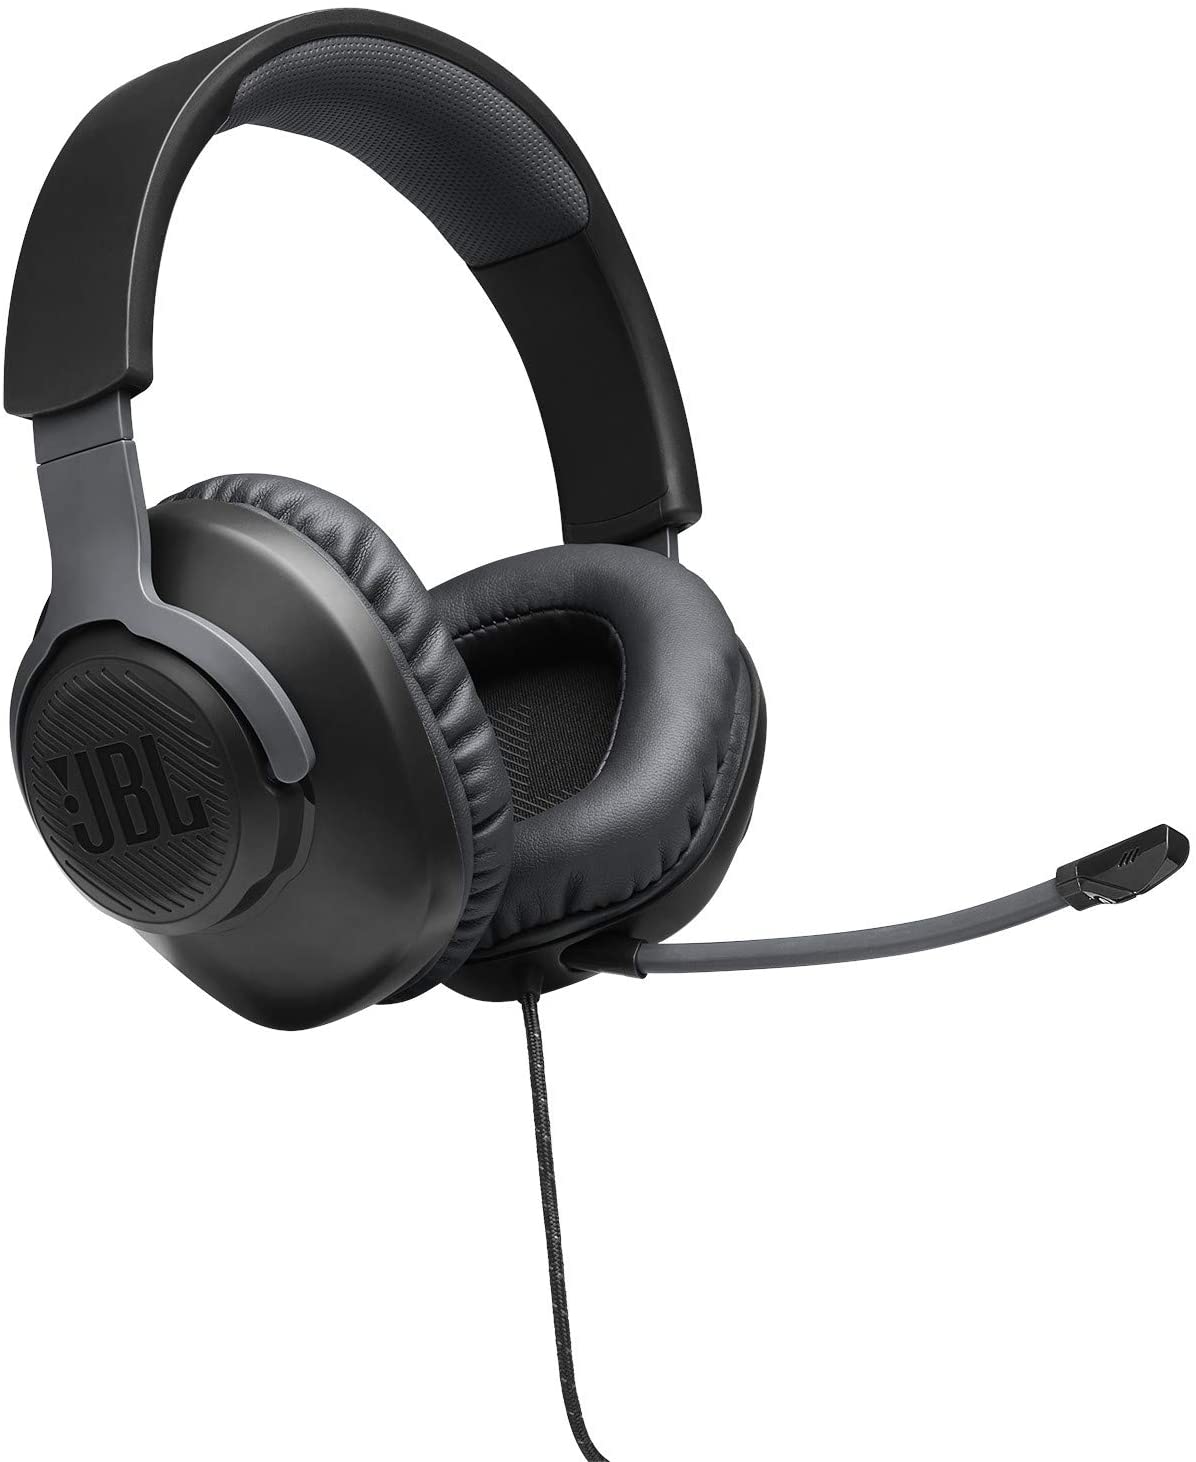 JBL Quantum 100 Wired Over-Ear Gaming Headset, Black